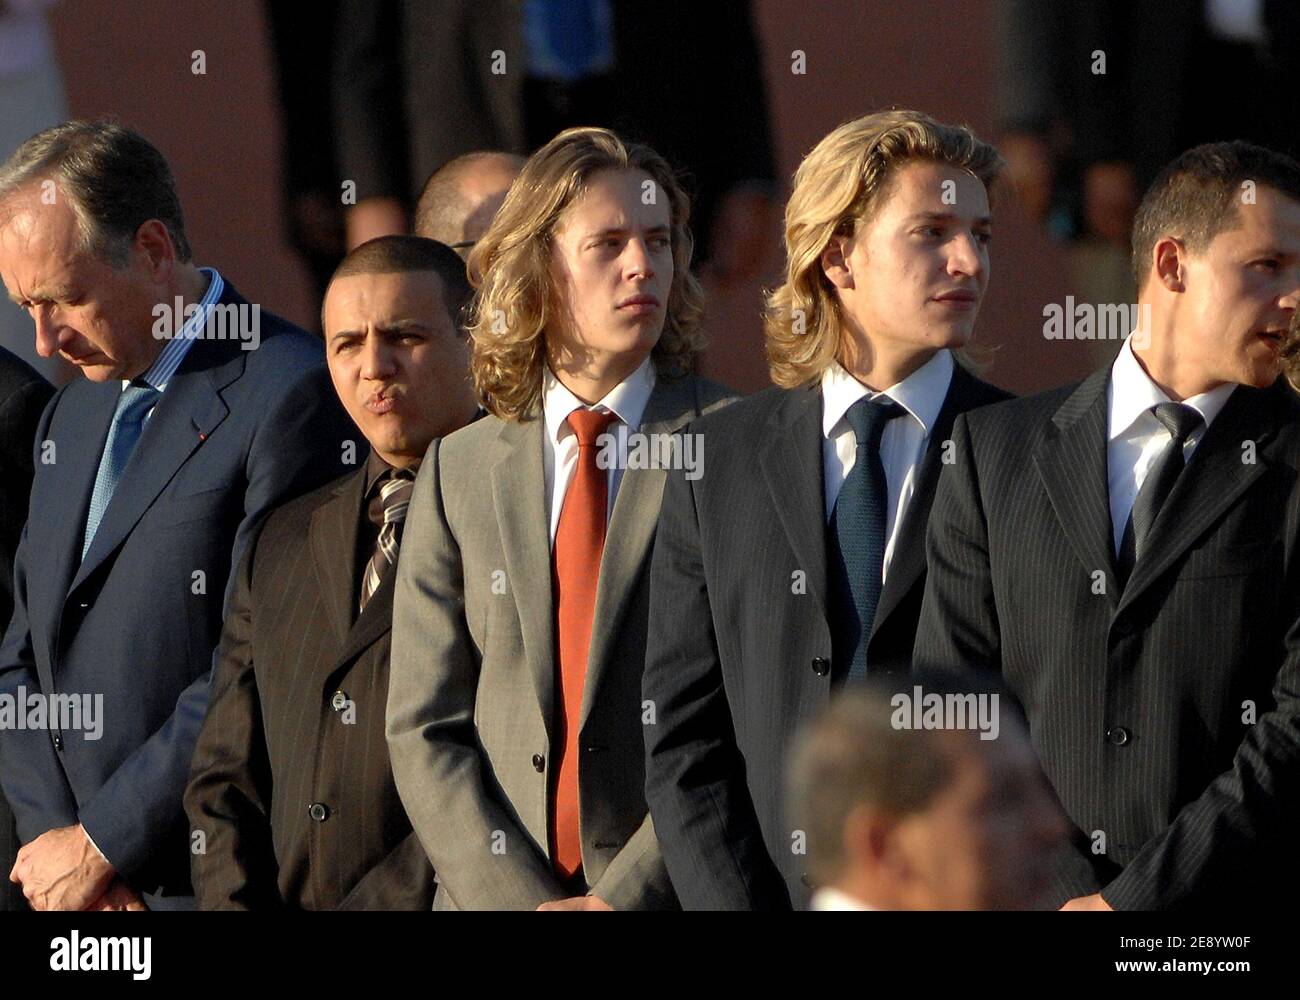 Singer Faudel beside French president Nicolas Sarkozy's sons Pierre and Jean during a welcome ceremony at the Marrakech airport, Morocco, on October 22, 2007, on the first day of a 3-Day state visit to Morocco Kingdom. Photo by Christophe Guibbaud/ABACAPRESS.COM Stock Photo